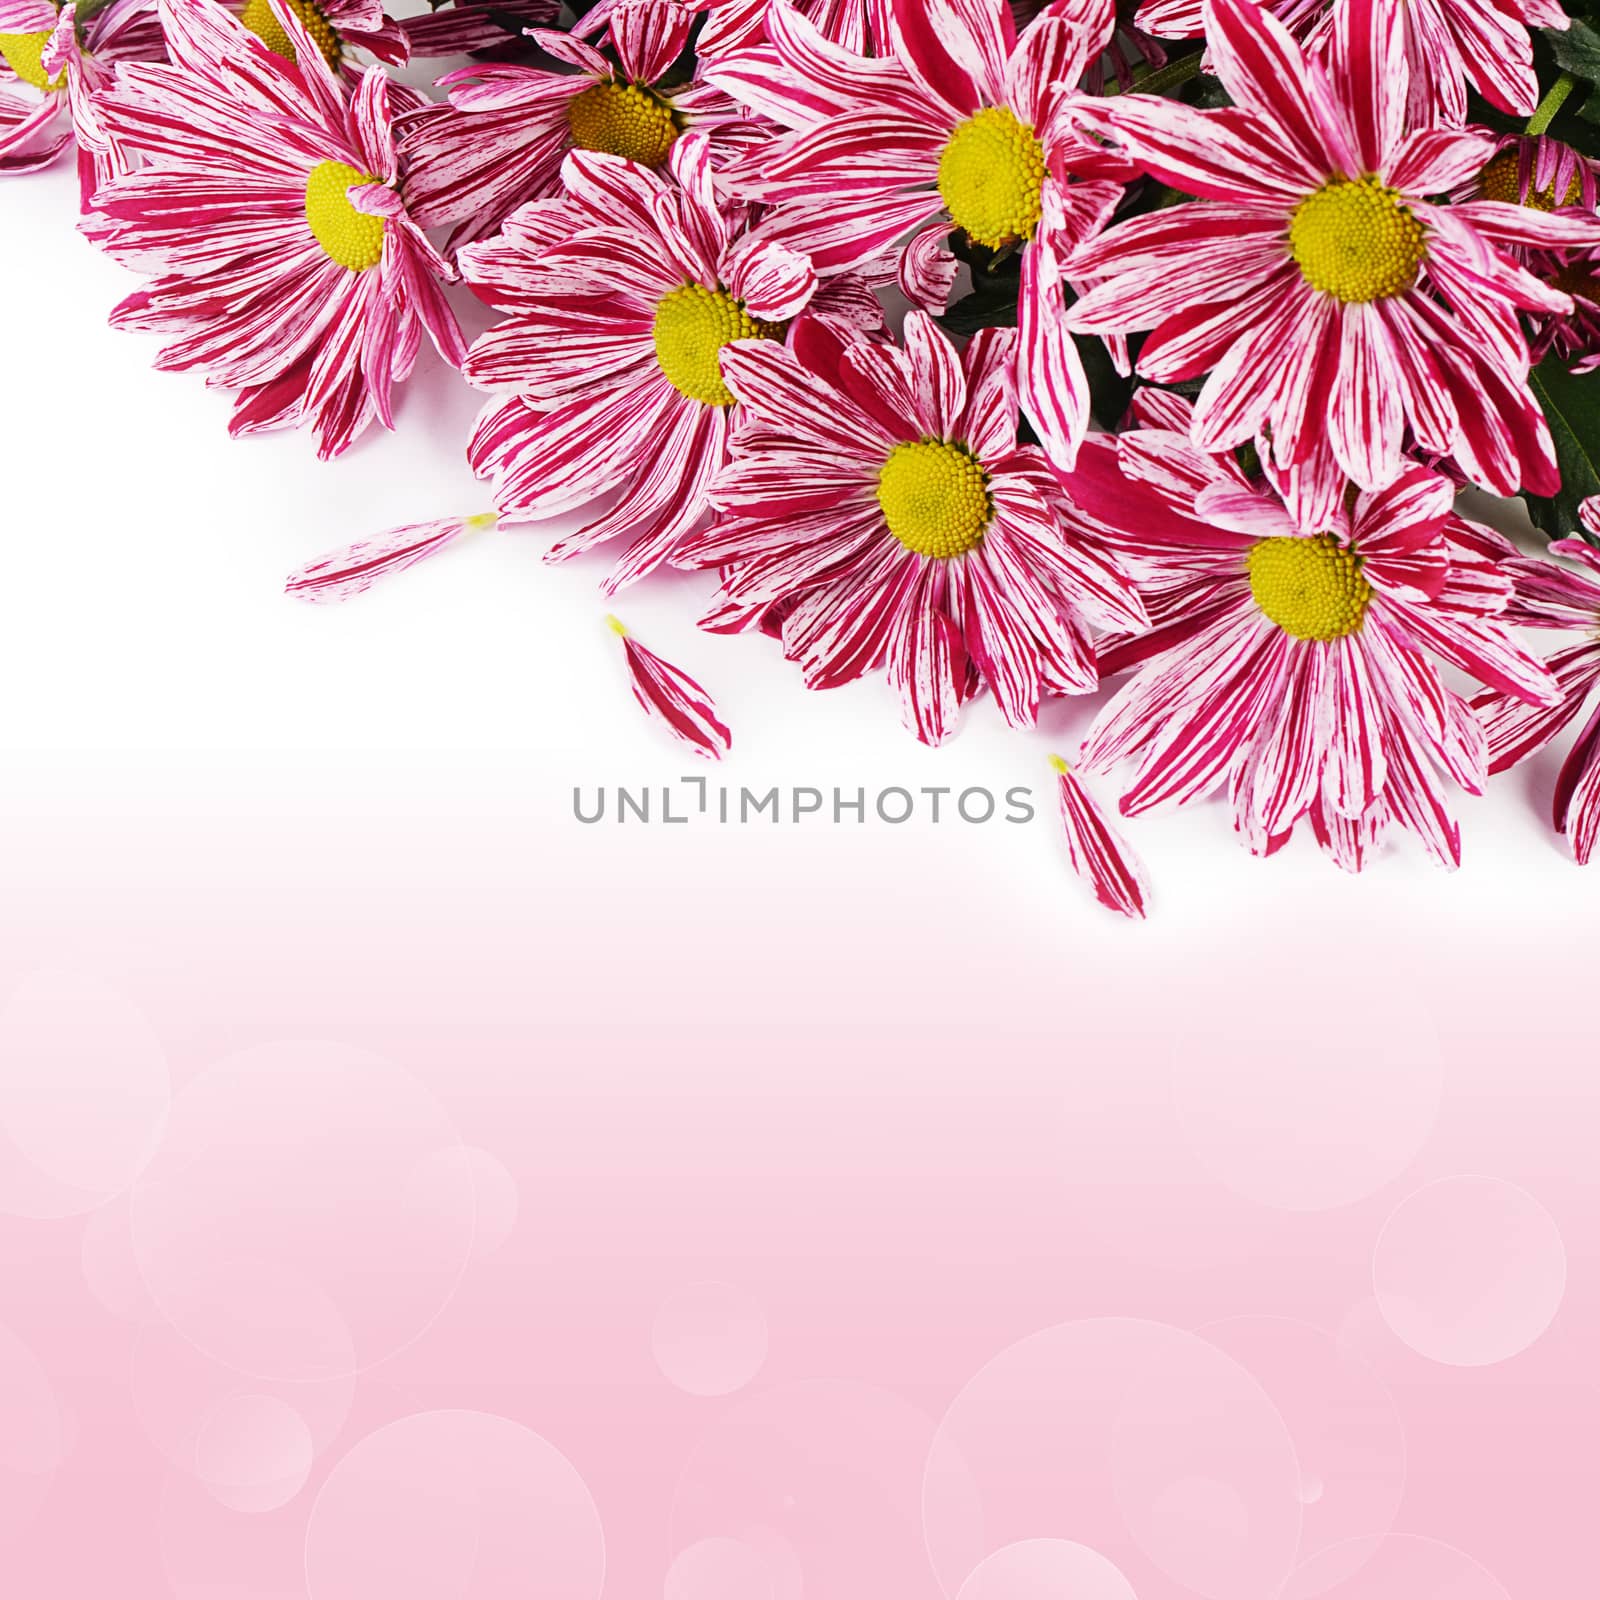 The flower pink chrysanthemums as a  background